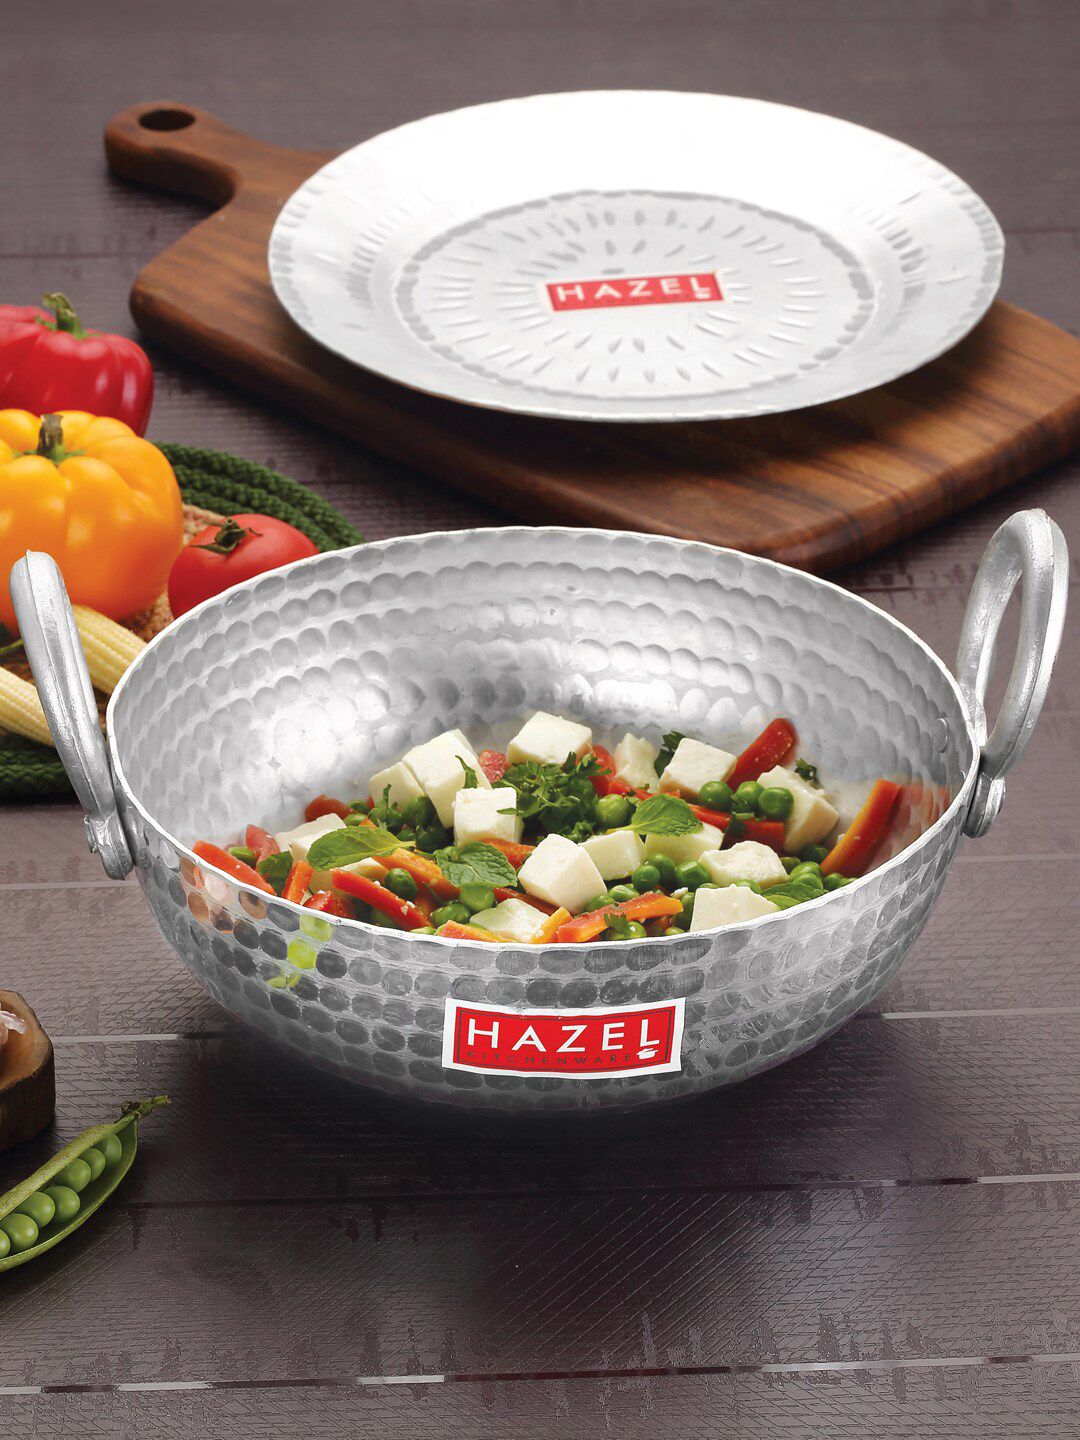 HAZEL Silver-Toned Hammered Aluminium Handi With Lid 1300 ML Price in India